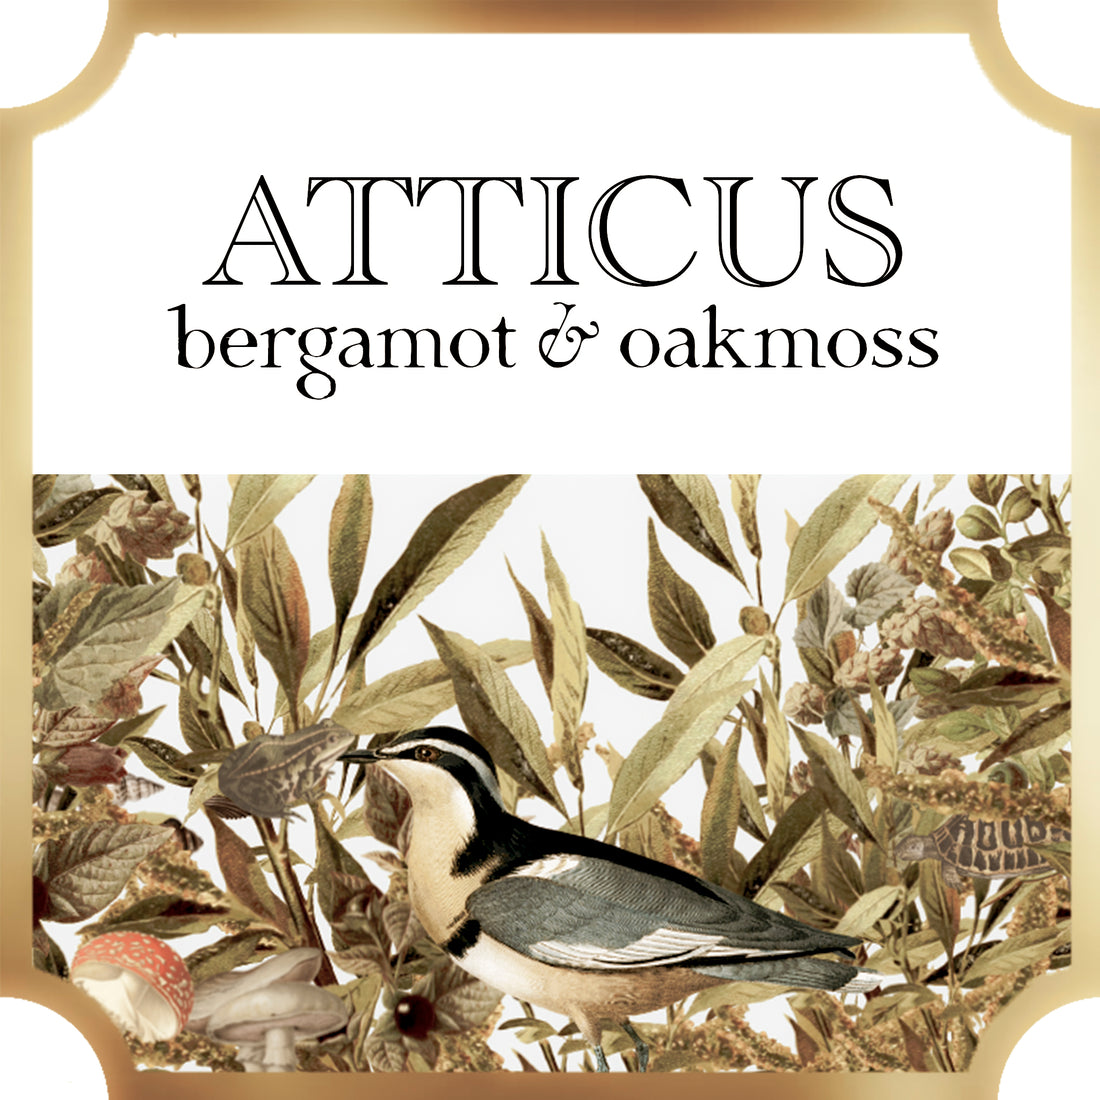  atticus bath and body a pleasant thought